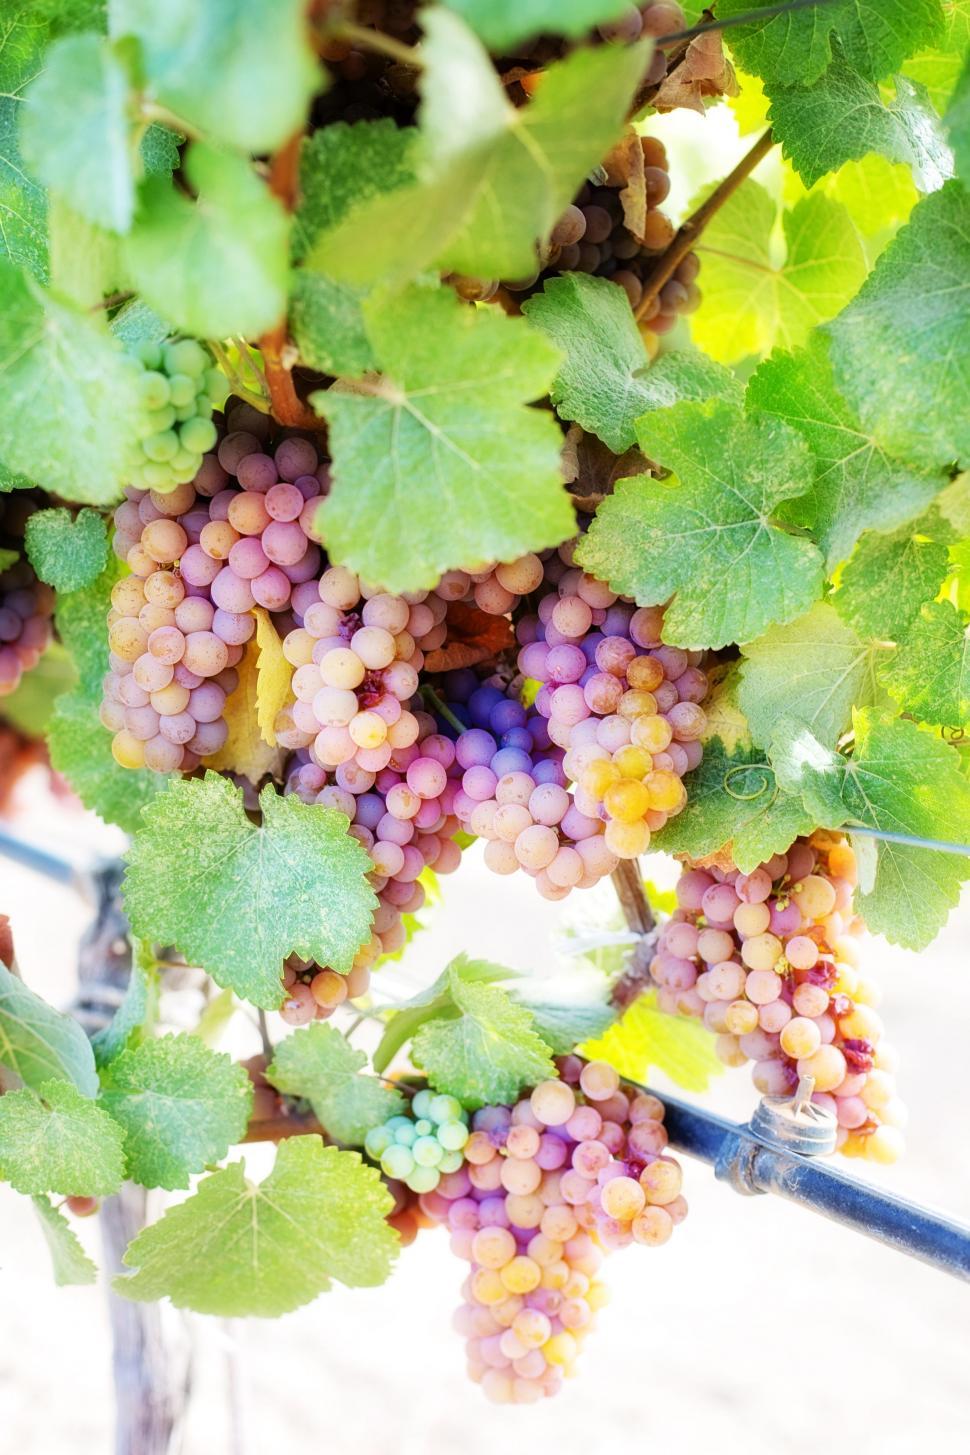 Free Image of Cluster of grapes with green leaves 